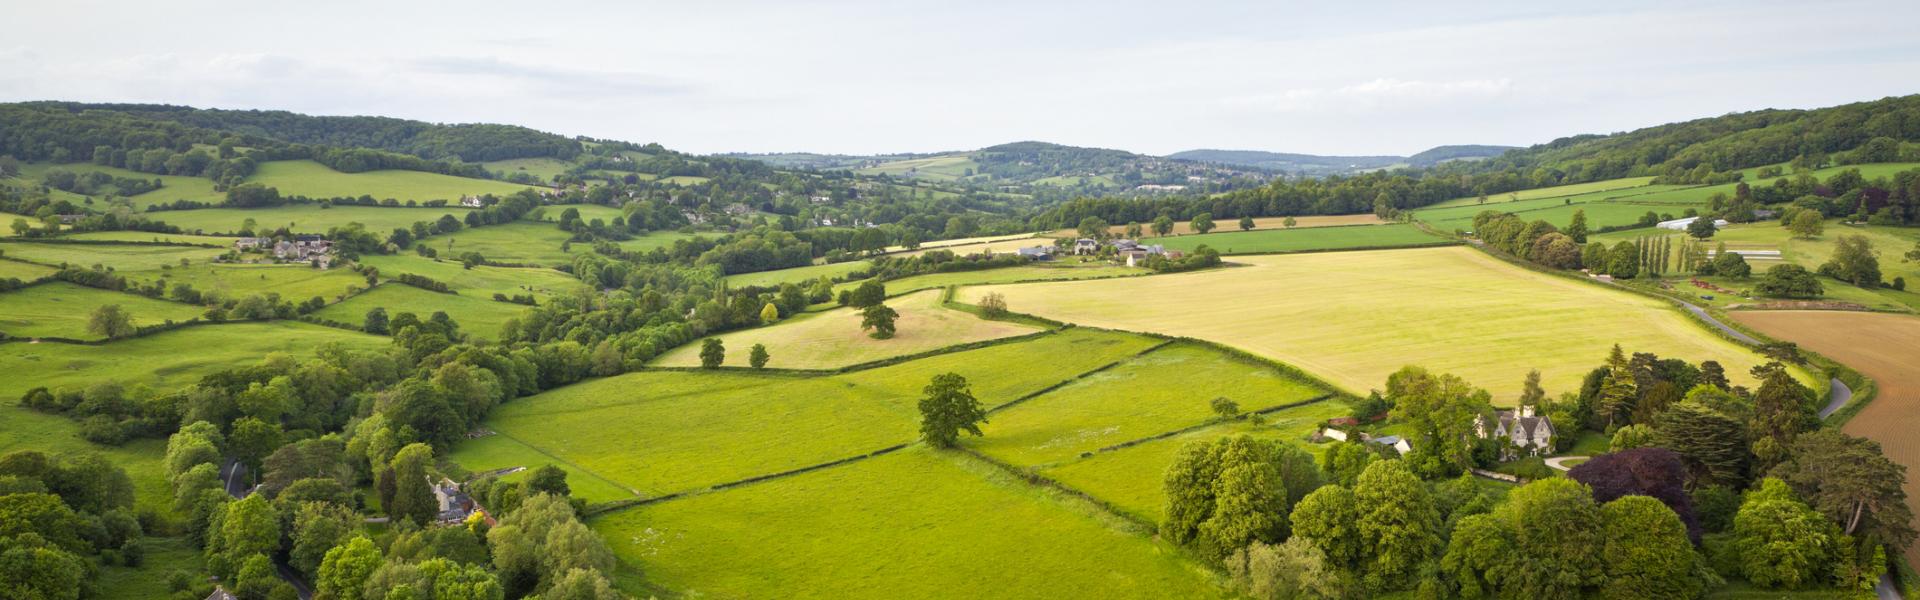 Holiday lettings & accommodation in Stroud District - HomeToGo